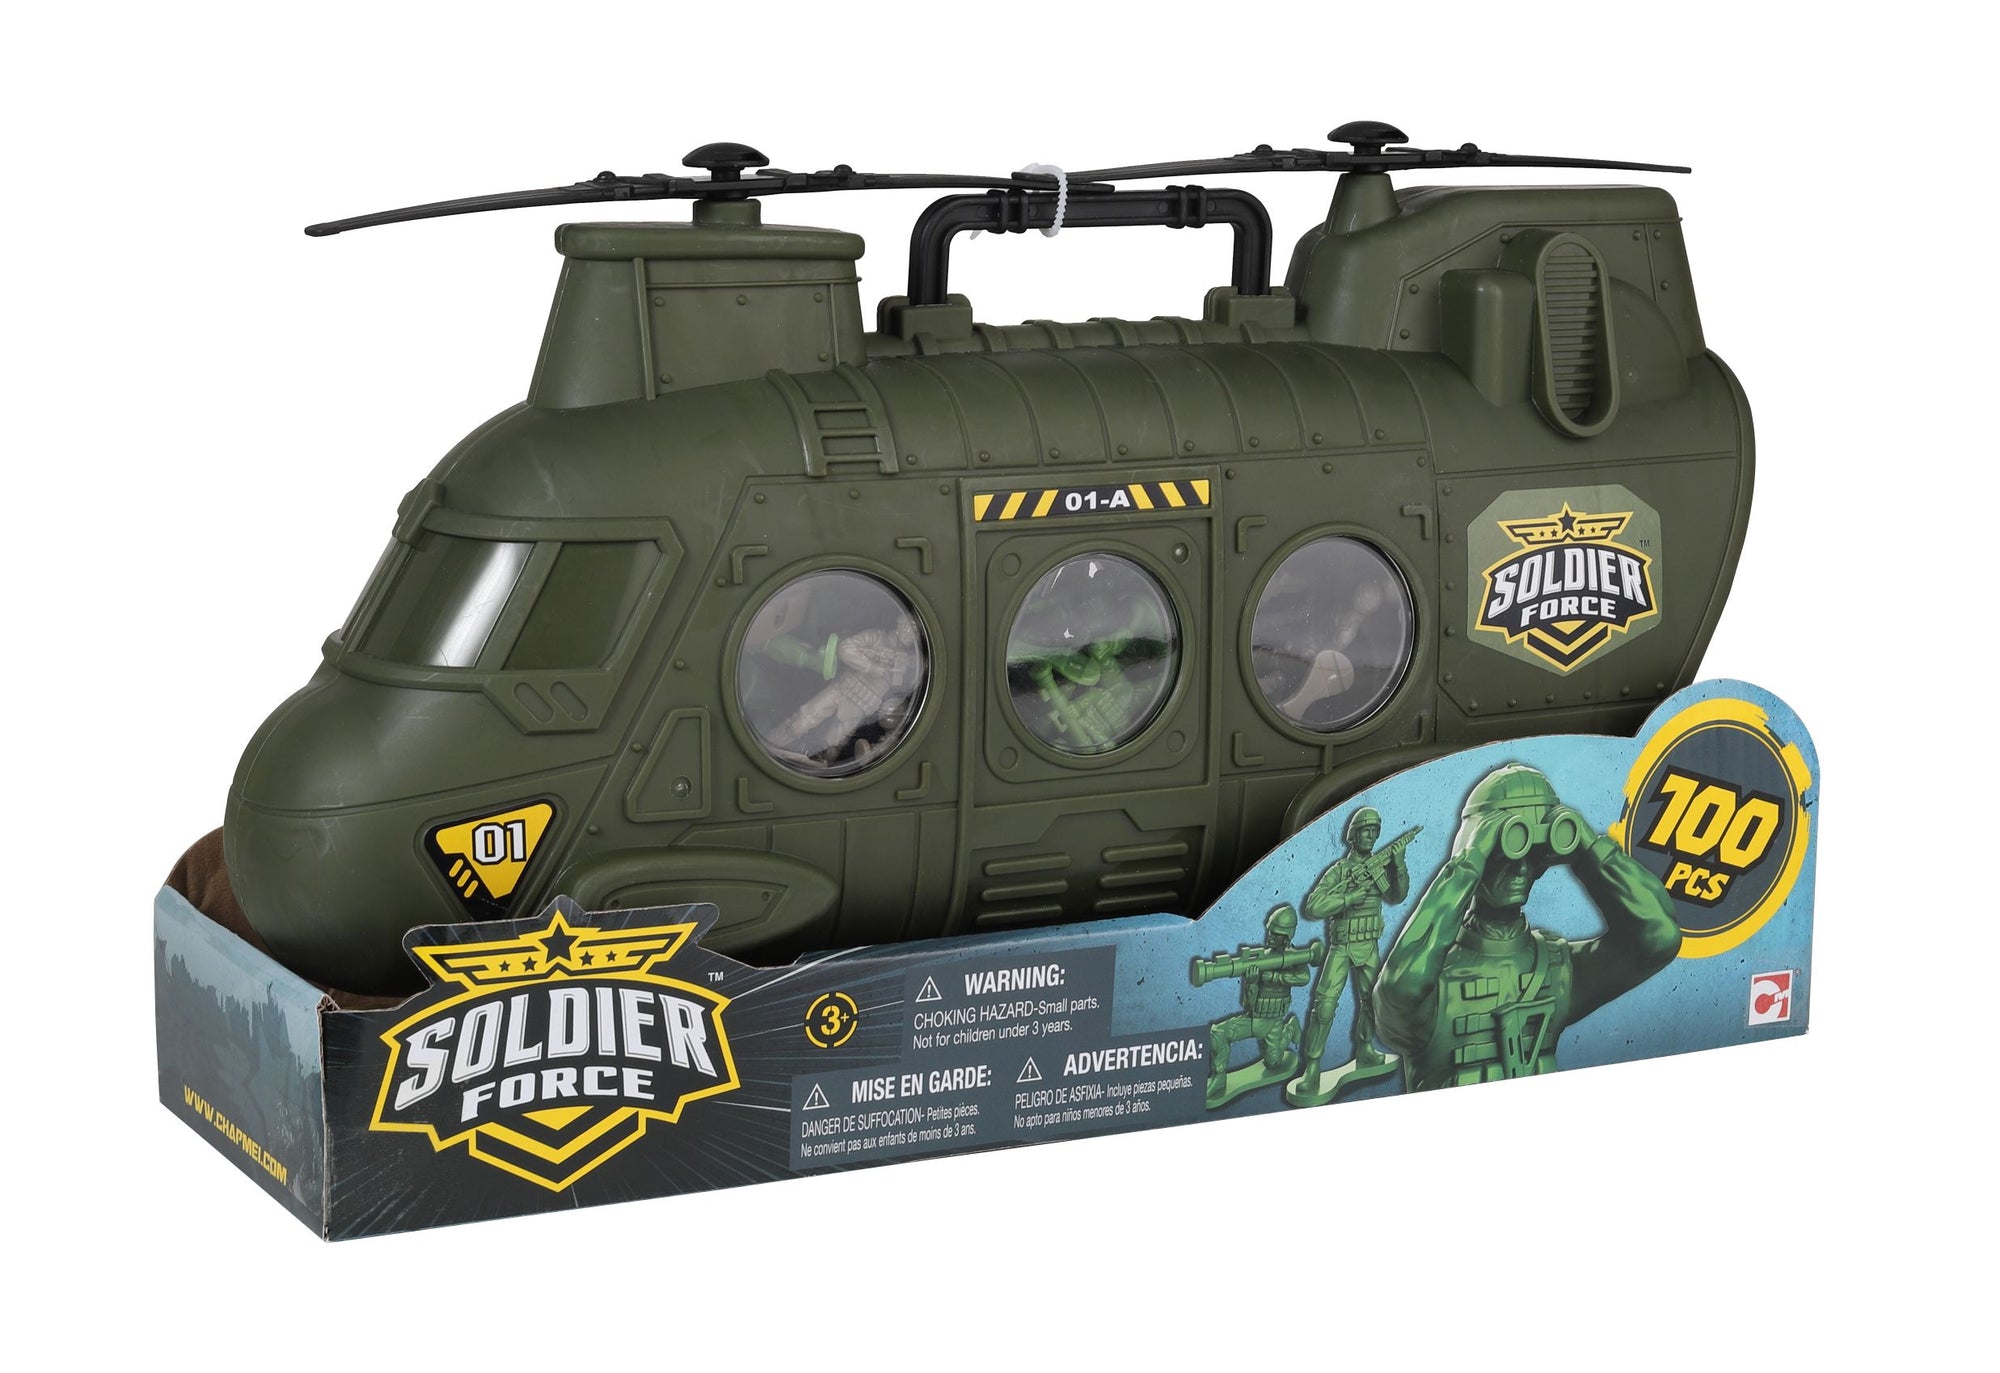 Soldier Force Chinook Bucket 100pc Playset